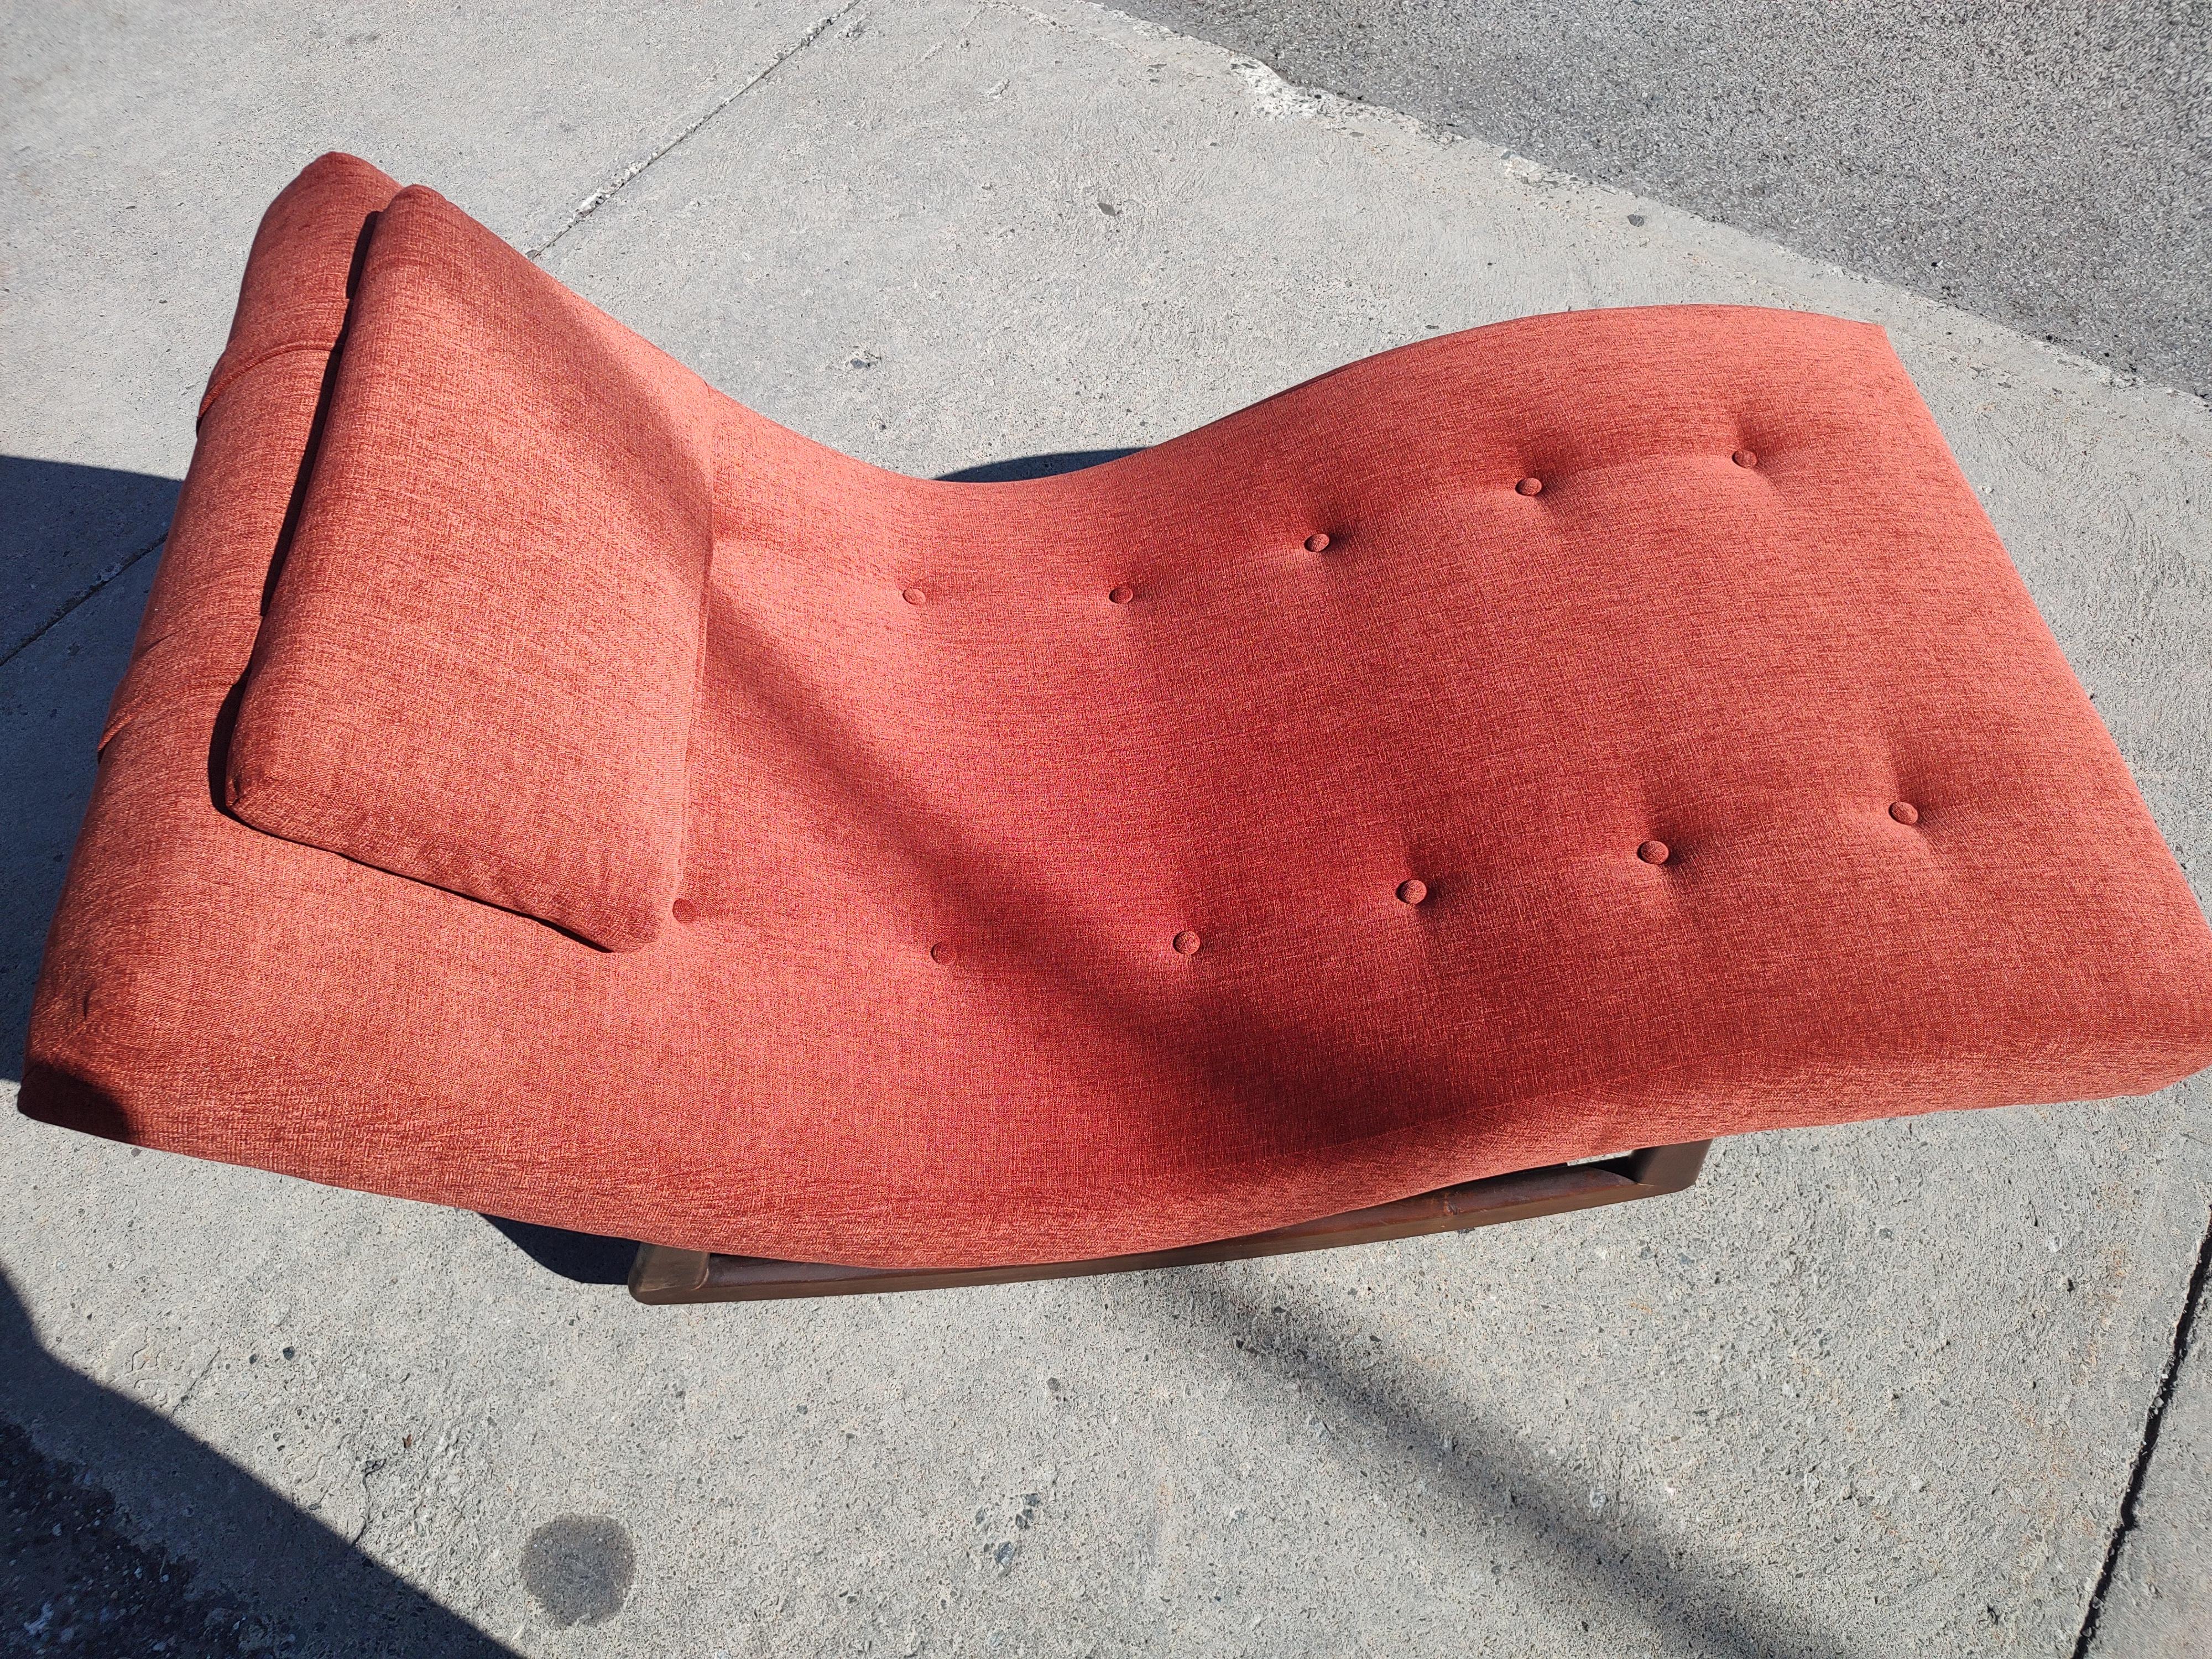 Mid Century Modern Sculptural Wave Chaise Lounge Rocker by Adrian Pearsall C1960 For Sale 4